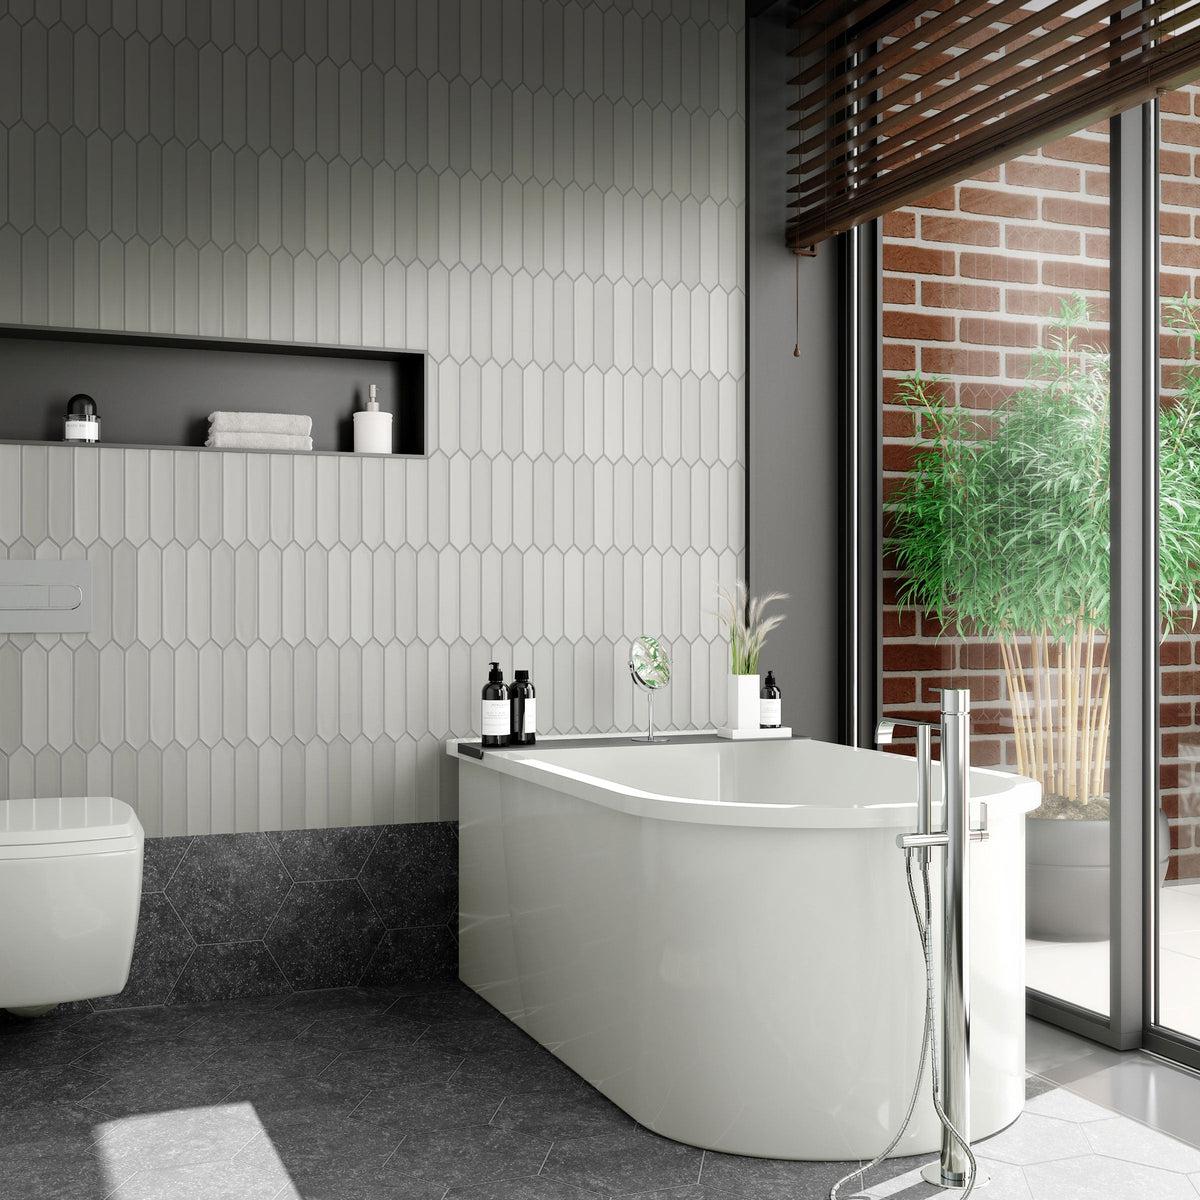 Gray ceramic picket tile bathroom feature wall